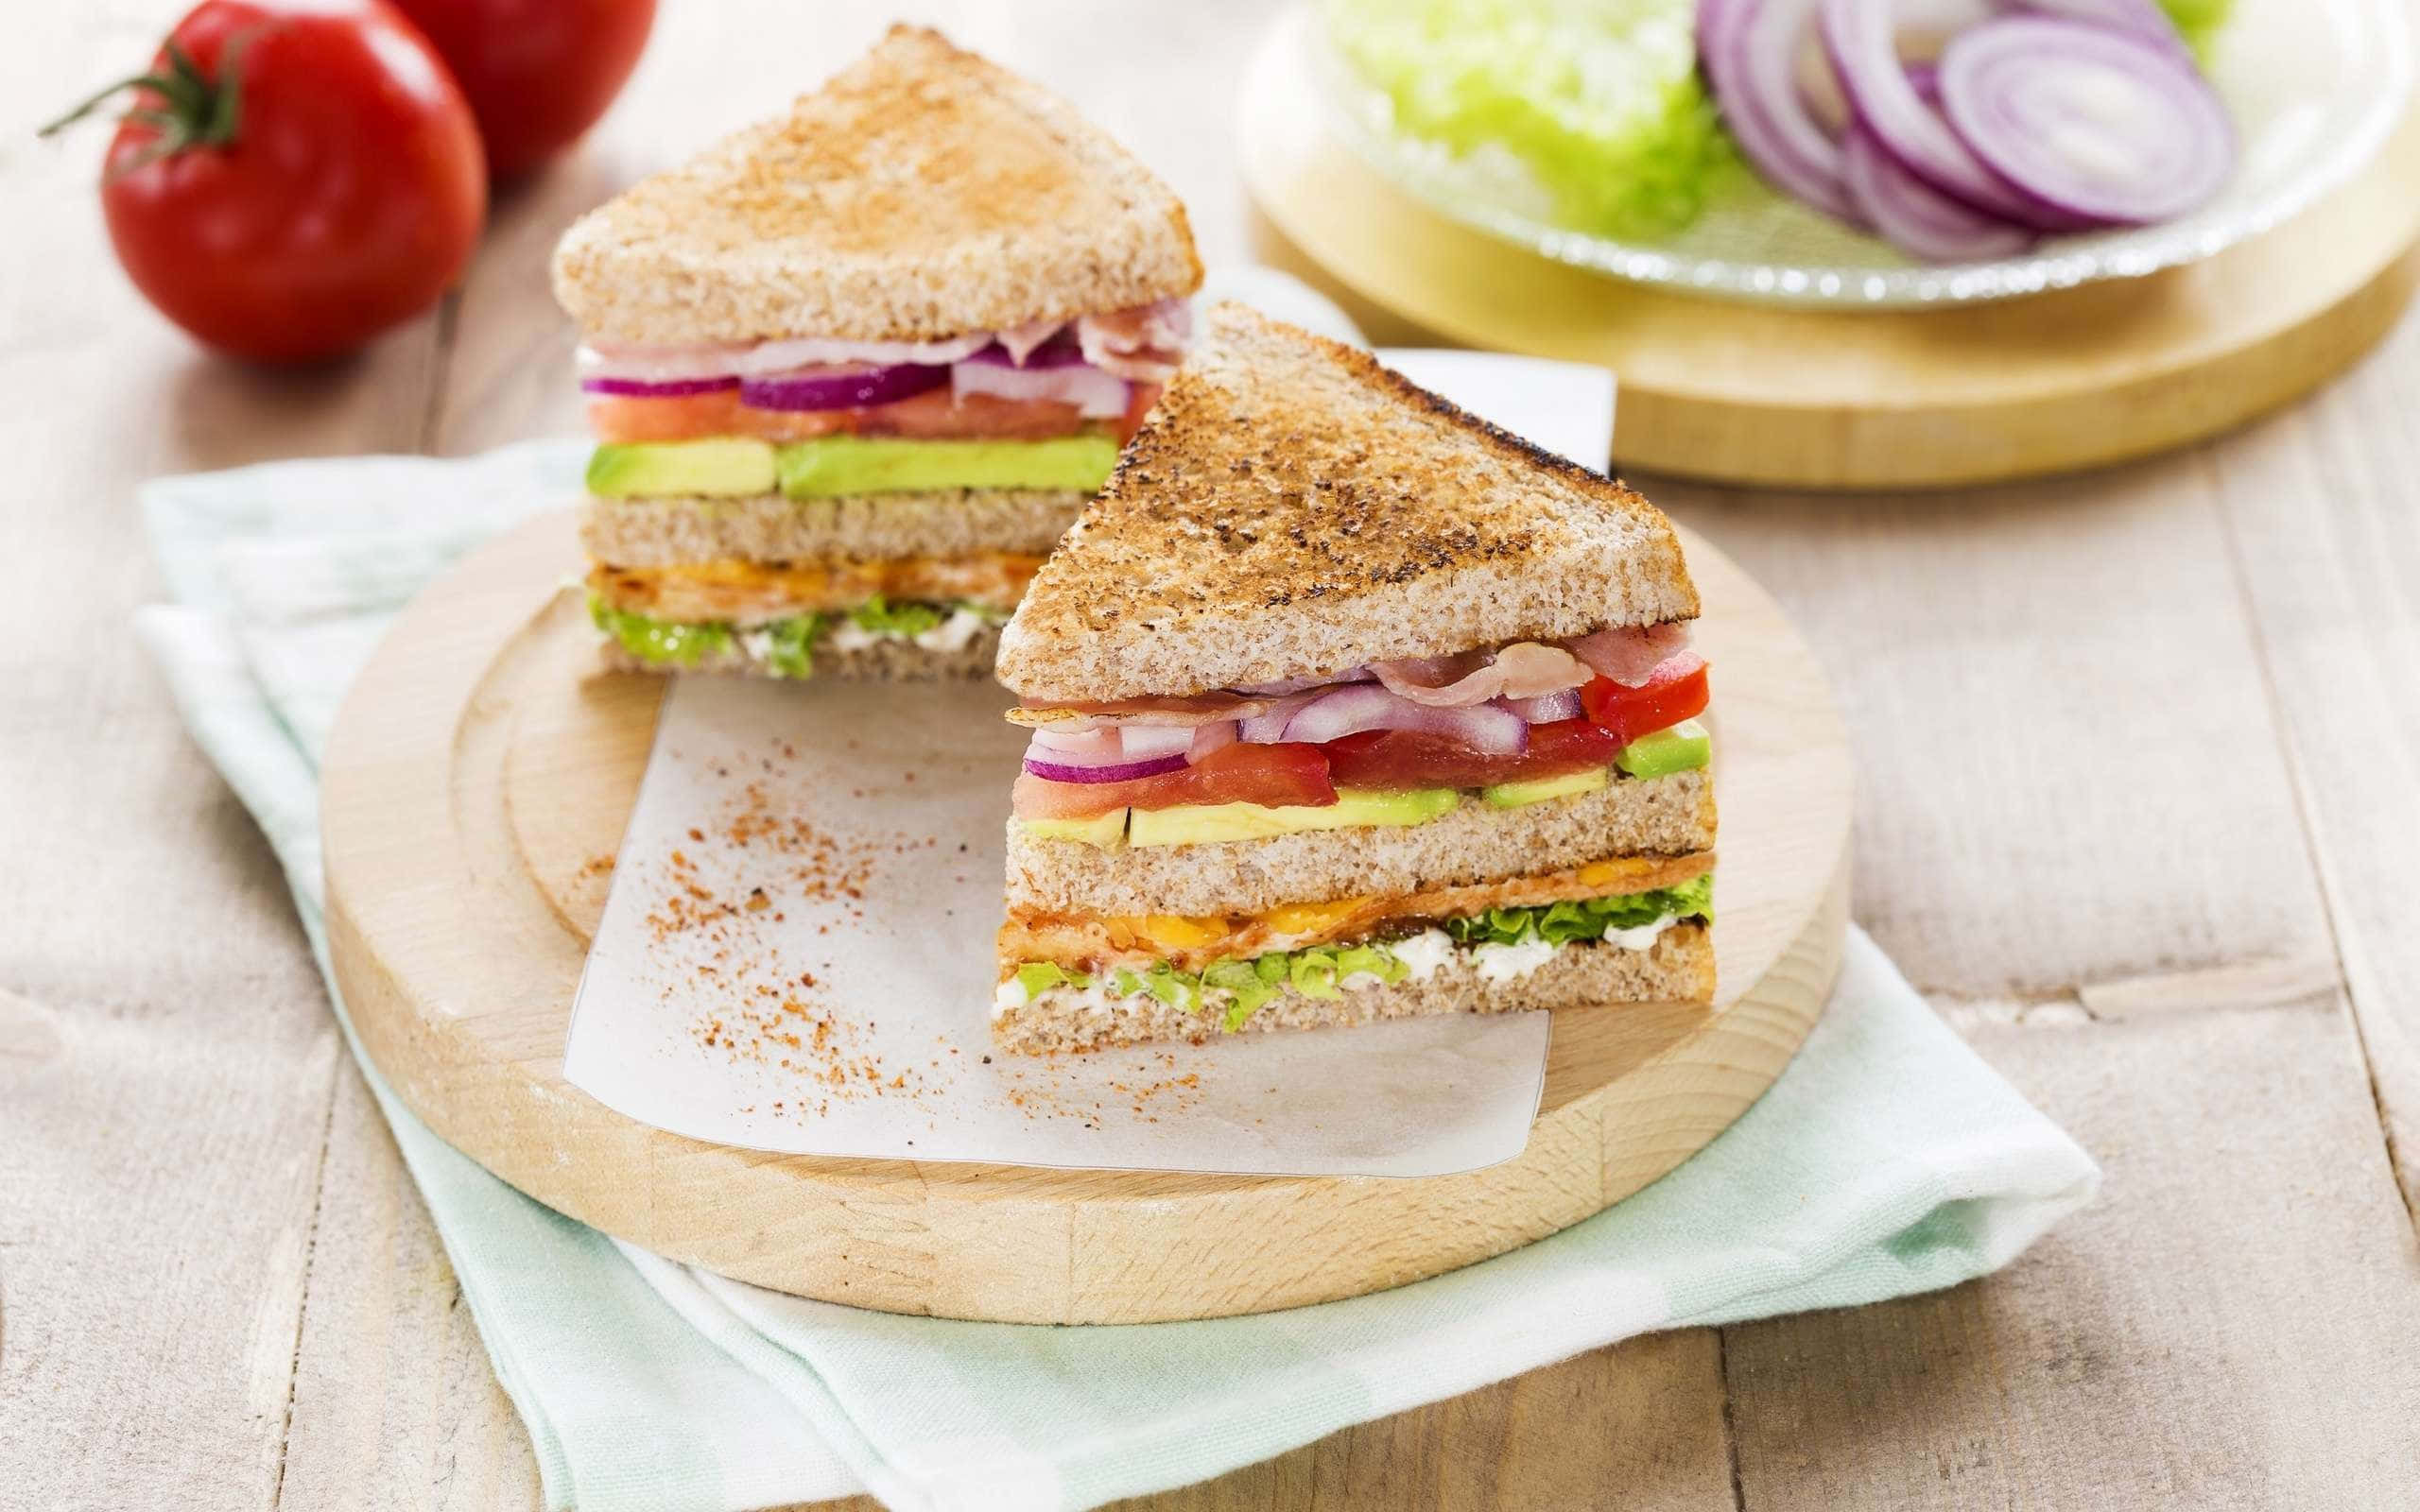 A Sandwich With Tomatoes, Lettuce, And Onions